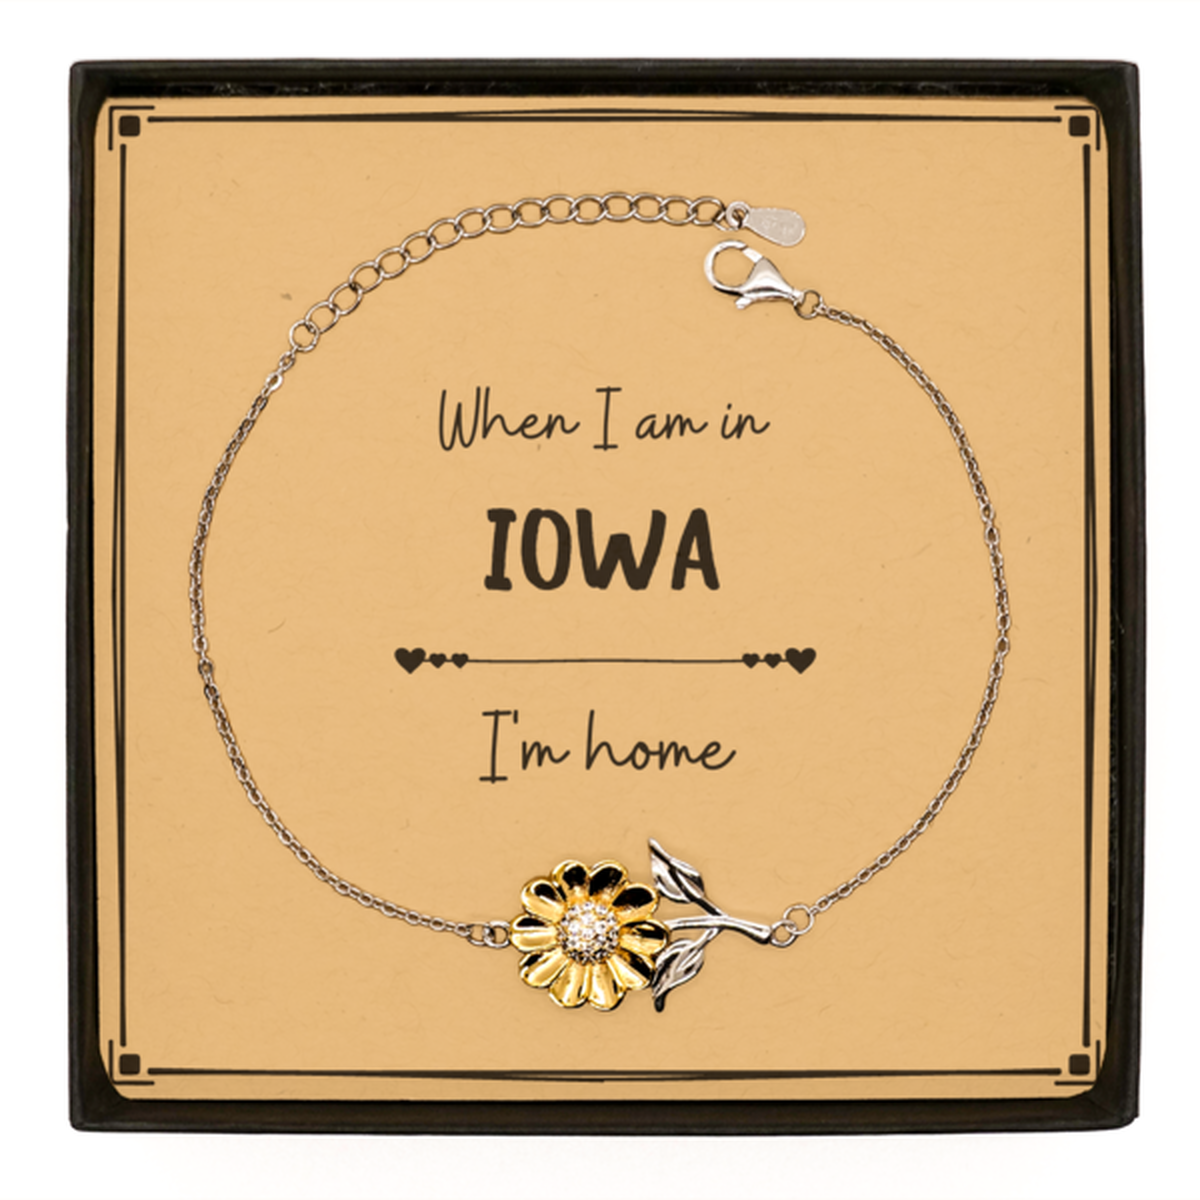 When I am in Iowa I'm home Sunflower Bracelet, Message Card Gifts For Iowa, State Iowa Birthday Gifts for Friends Coworker